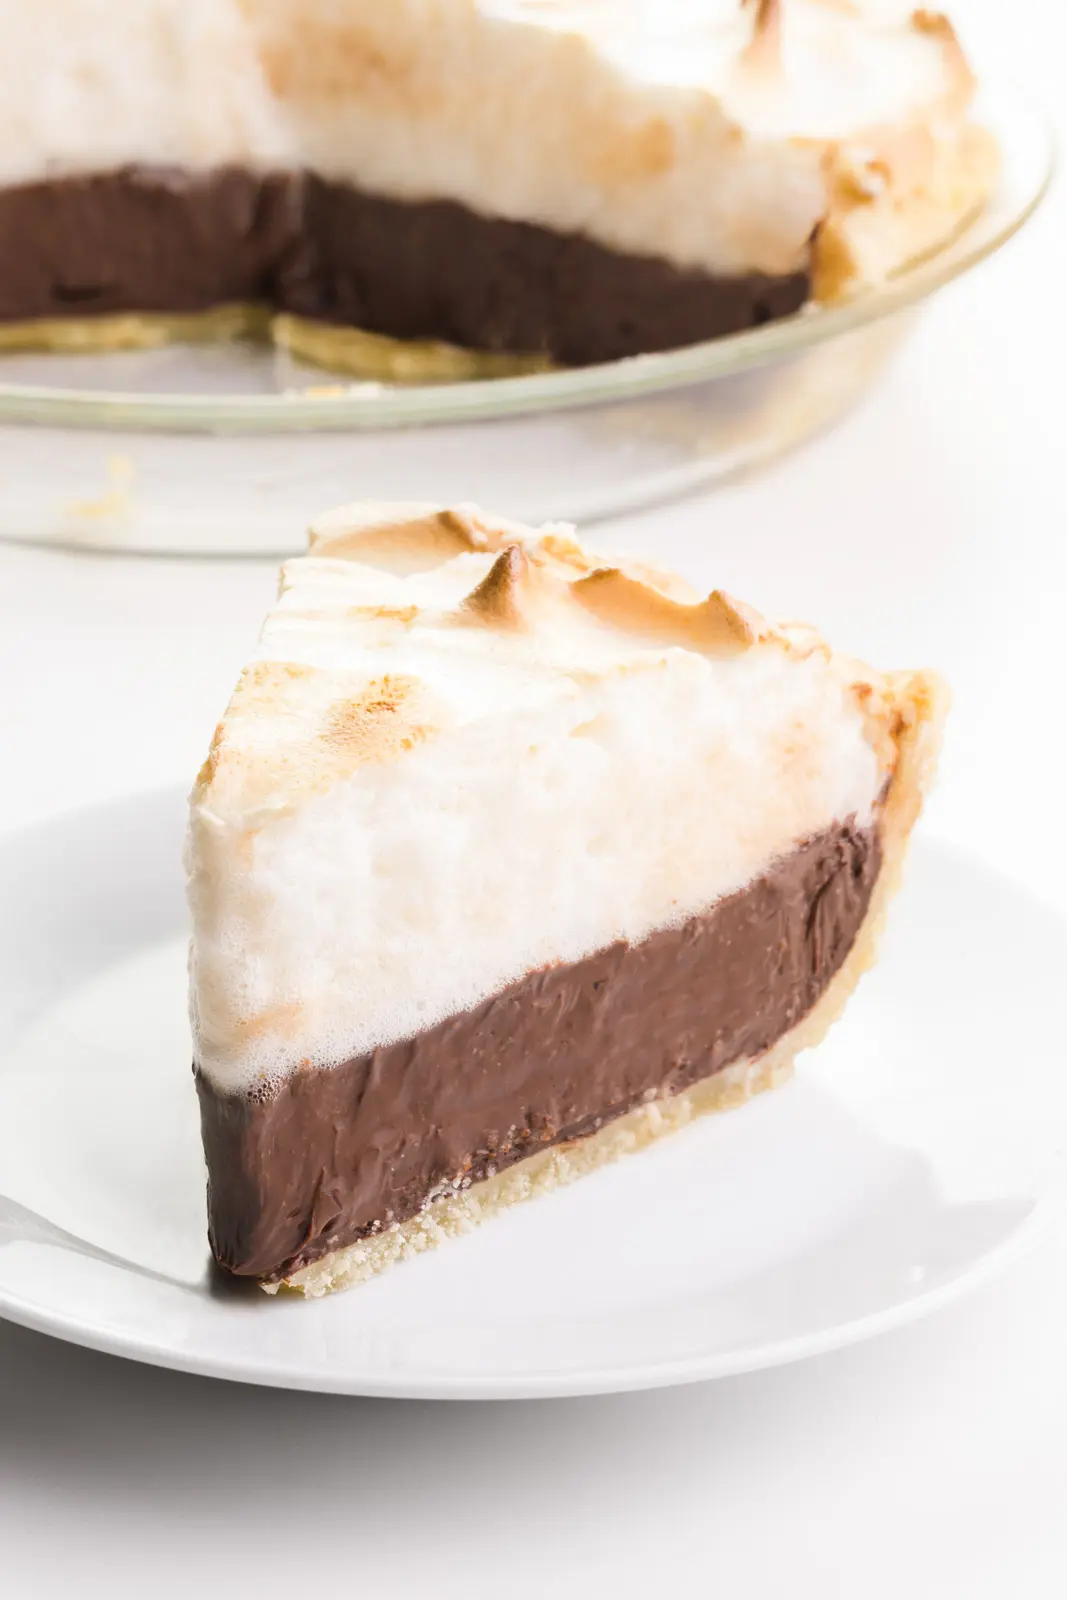 Vegan Chocolate Meringue Pie; Part of a round-up collection of recipes compiled by Jane Bonacci, The Heritage Cook, 15 Chocolate Desserts for your Holiday Table.